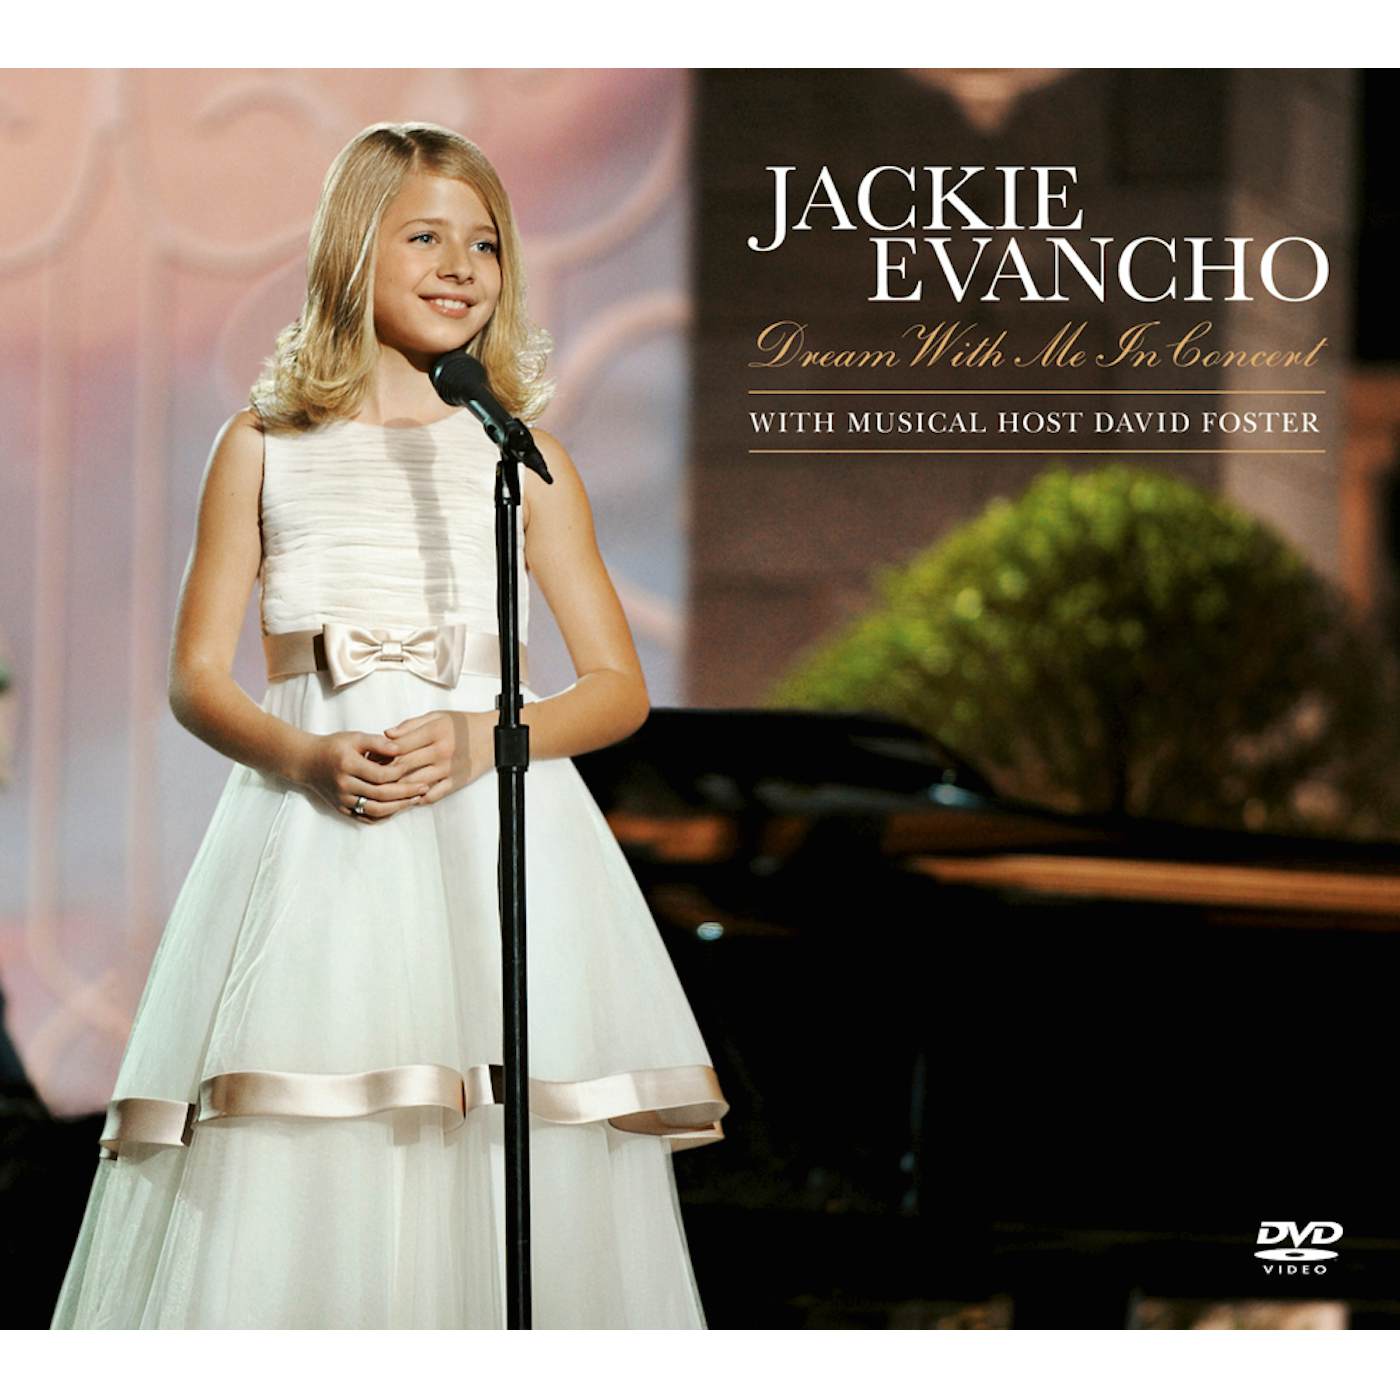 Jackie Evancho DREAM WITH ME IN CONCERT CD